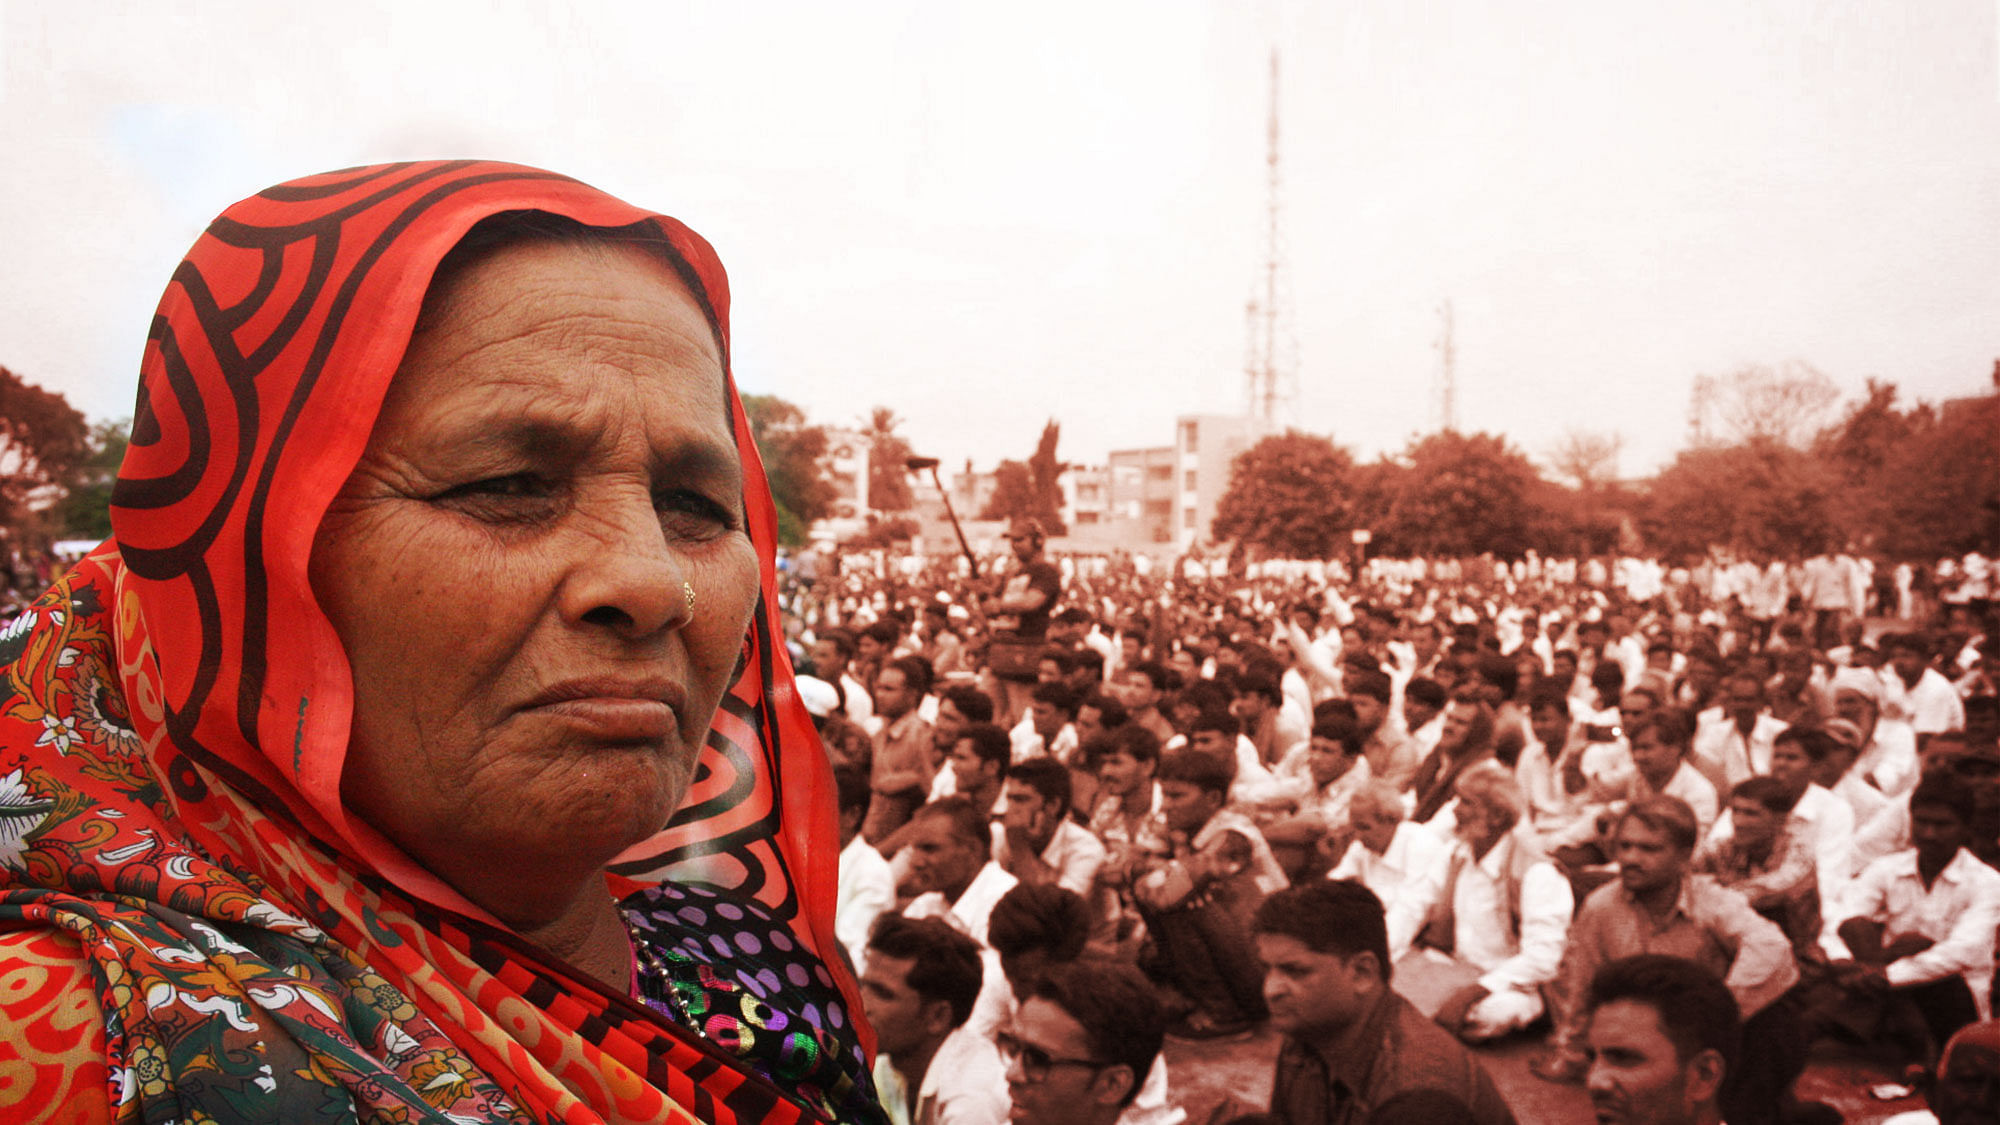 A sizeable proportion of the Dalit rising at Una was women. (Photo Courtesy: Revati Laul, altered by <b>The Quint</b>)